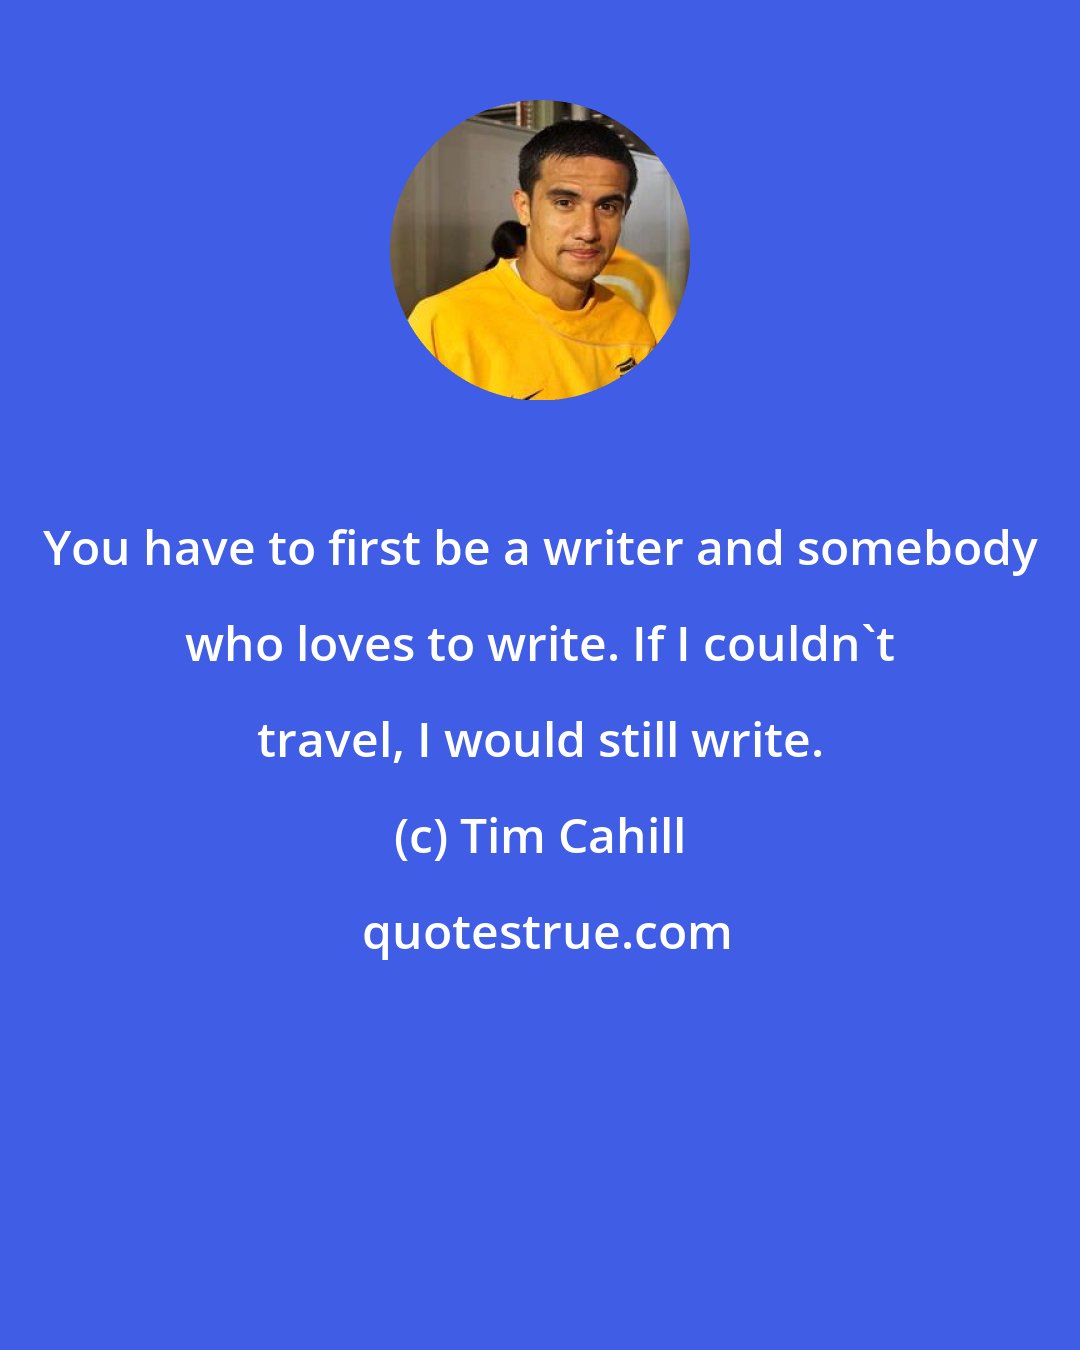 Tim Cahill: You have to first be a writer and somebody who loves to write. If I couldn't travel, I would still write.